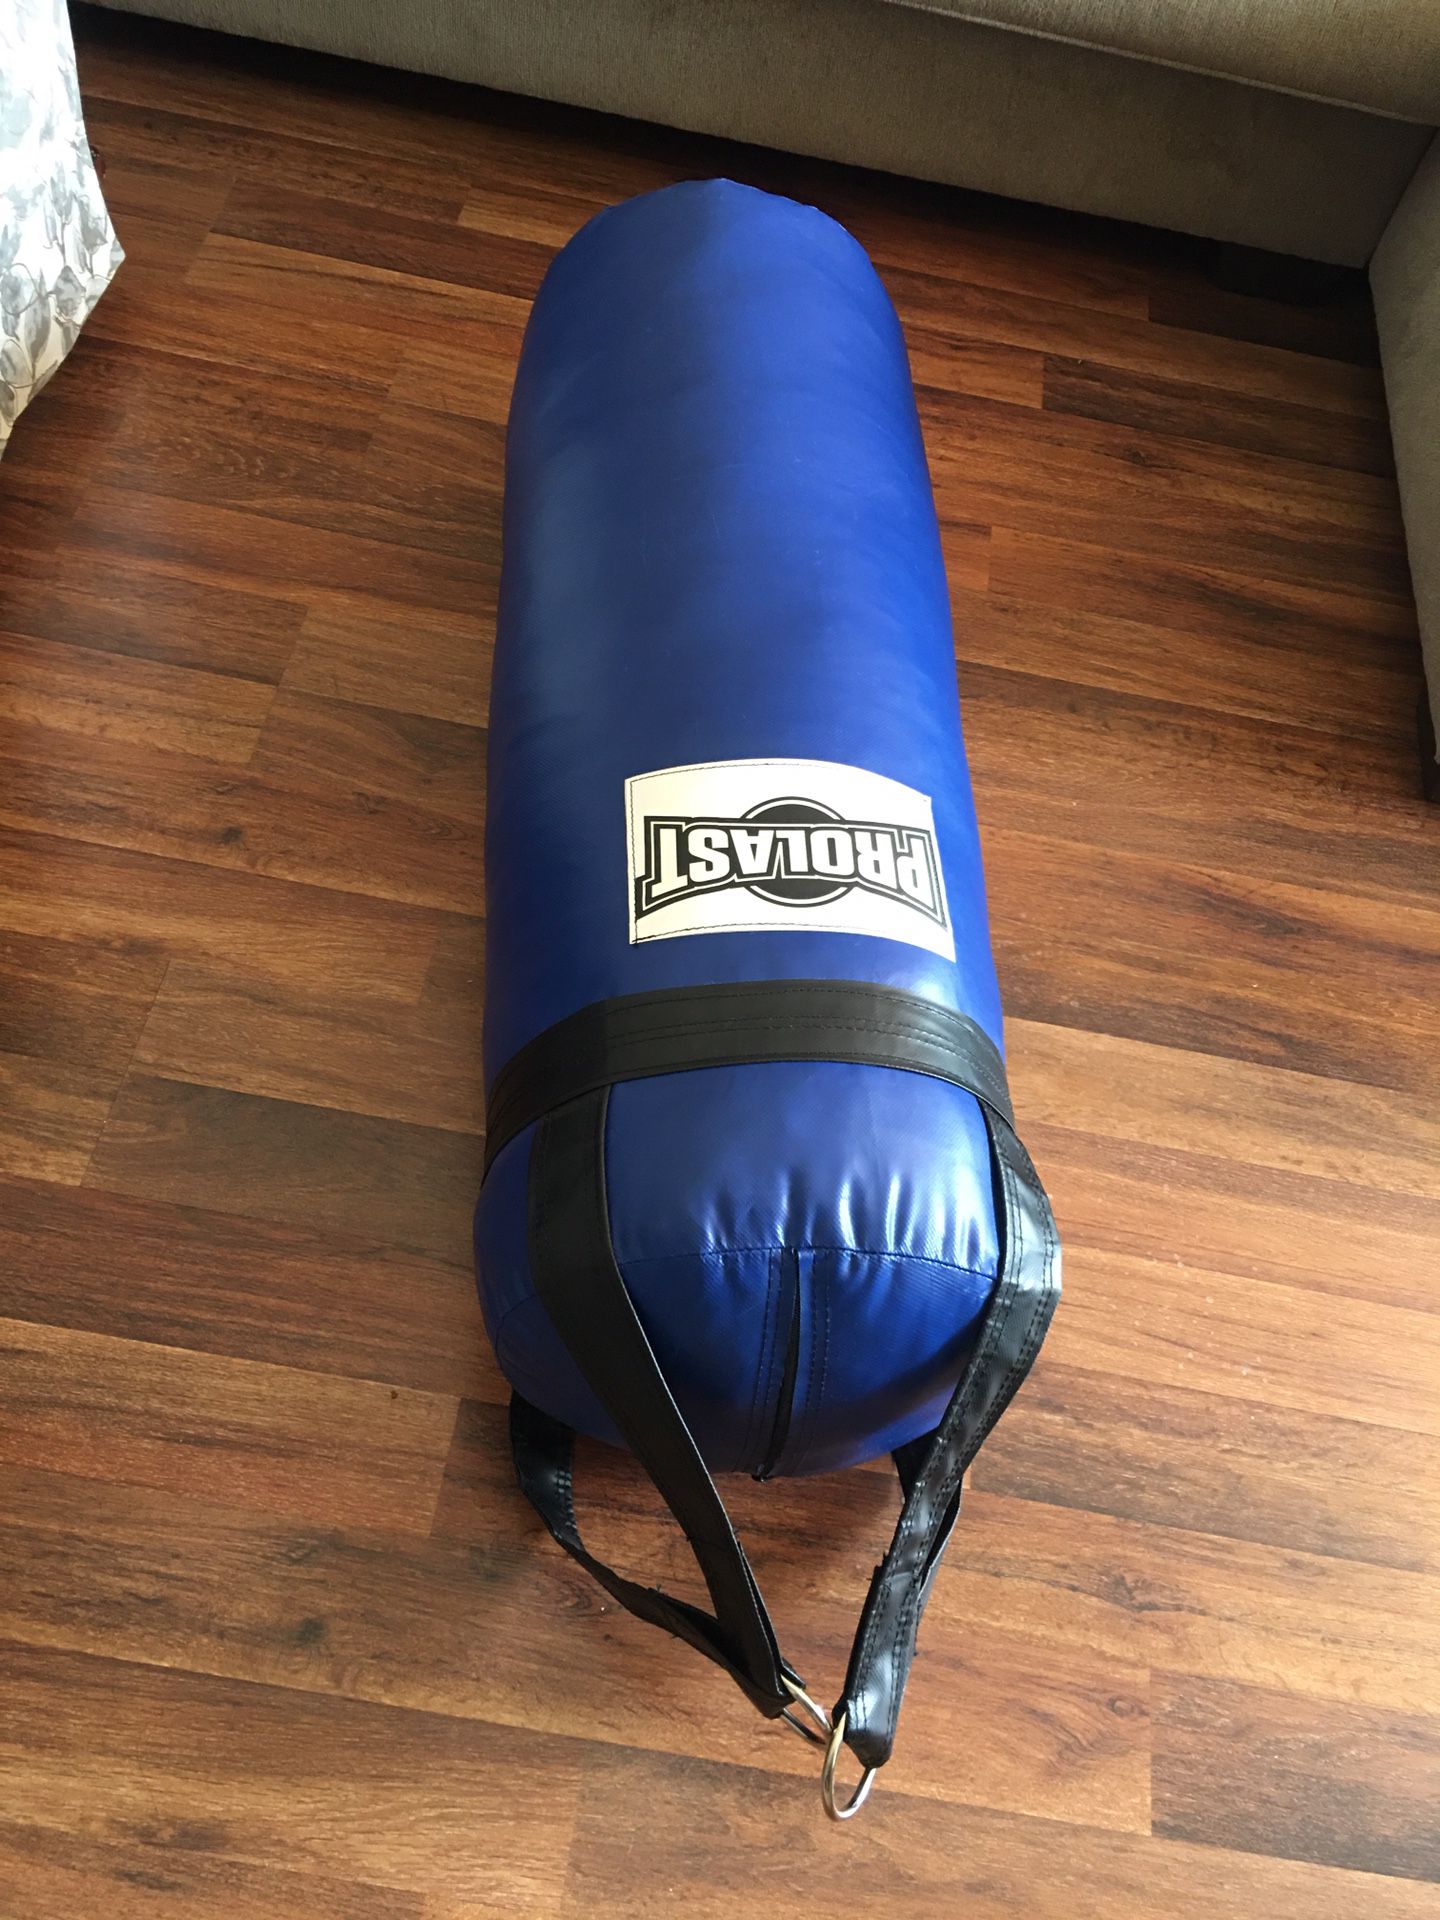 PUNCHING BAG BRAND NEW 70 POUNDS FILLED LUXURY ABOUT 4 FEET TALL MADE USA 🇺🇸 